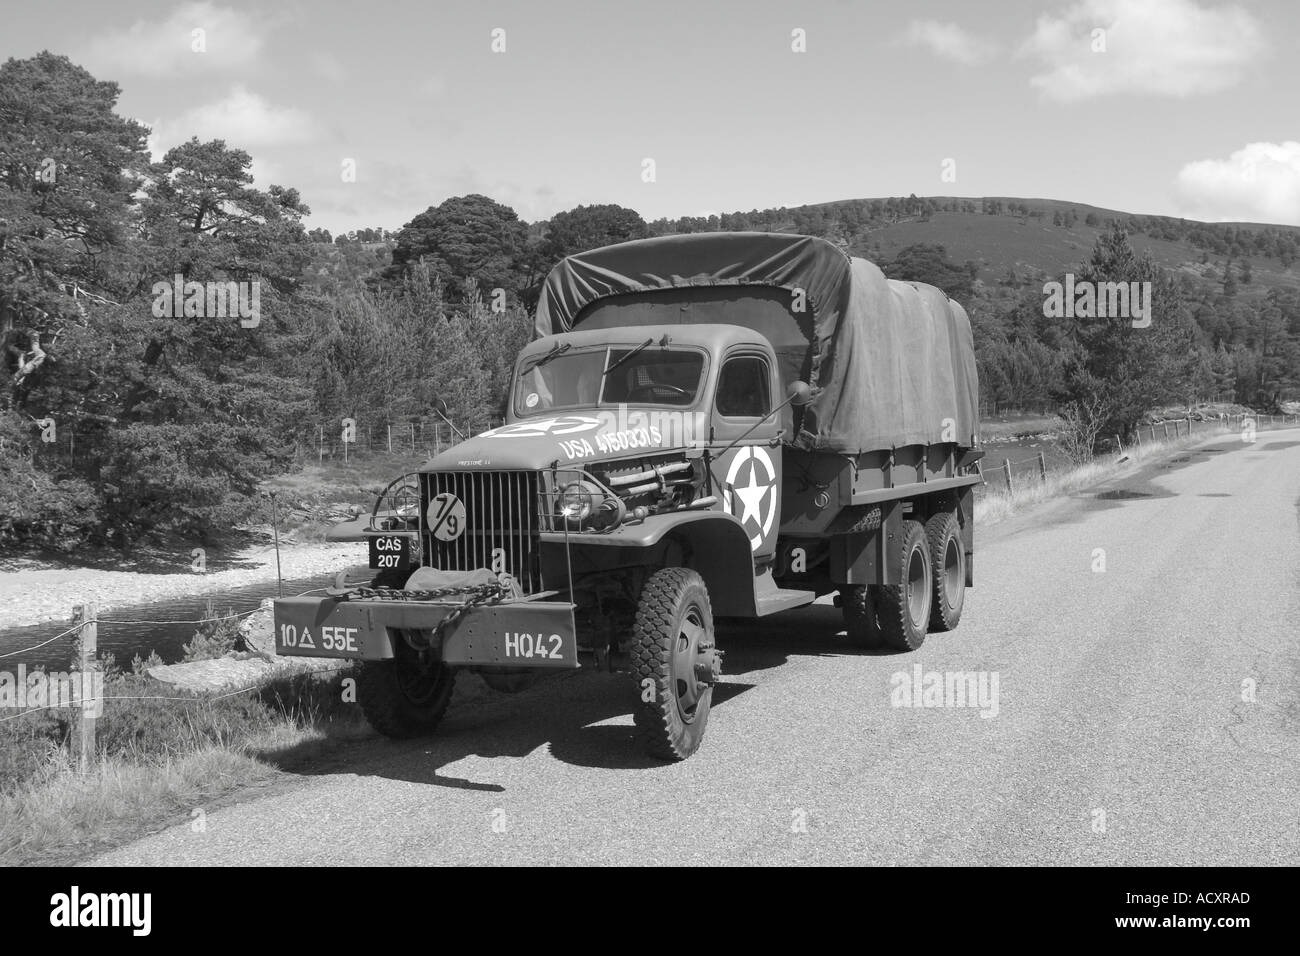 1942 40s GMC 'Jimmy' World War II 'Deuce-and-a-half' vintage American army truck, wartime two-and-a-half ton vehicle in WWII,  Second World War lorry. Stock Photo